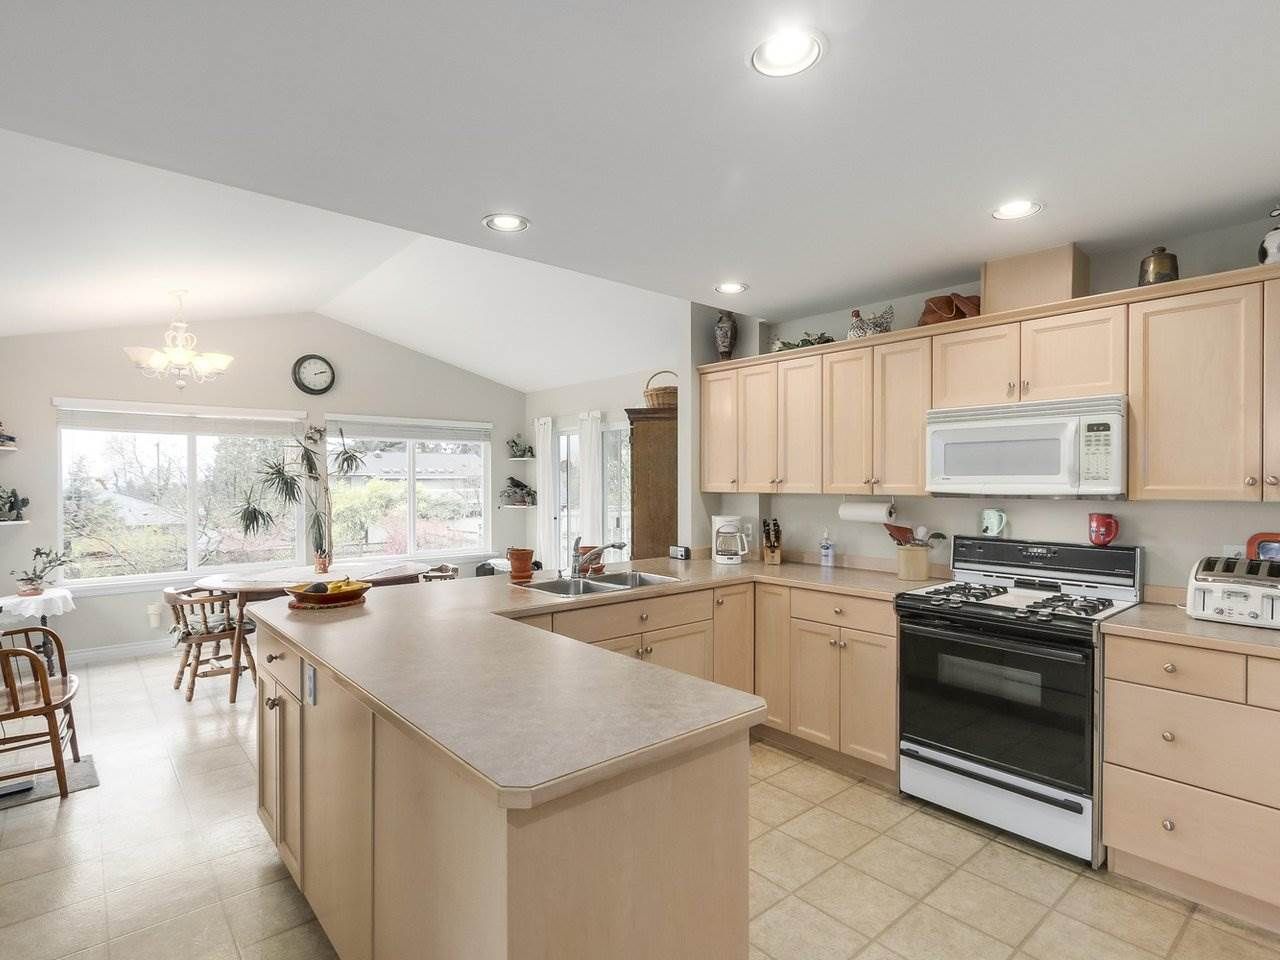 Photo 3: Photos: 672 FLORENCE Street in Coquitlam: Coquitlam West House for sale : MLS®# R2255976